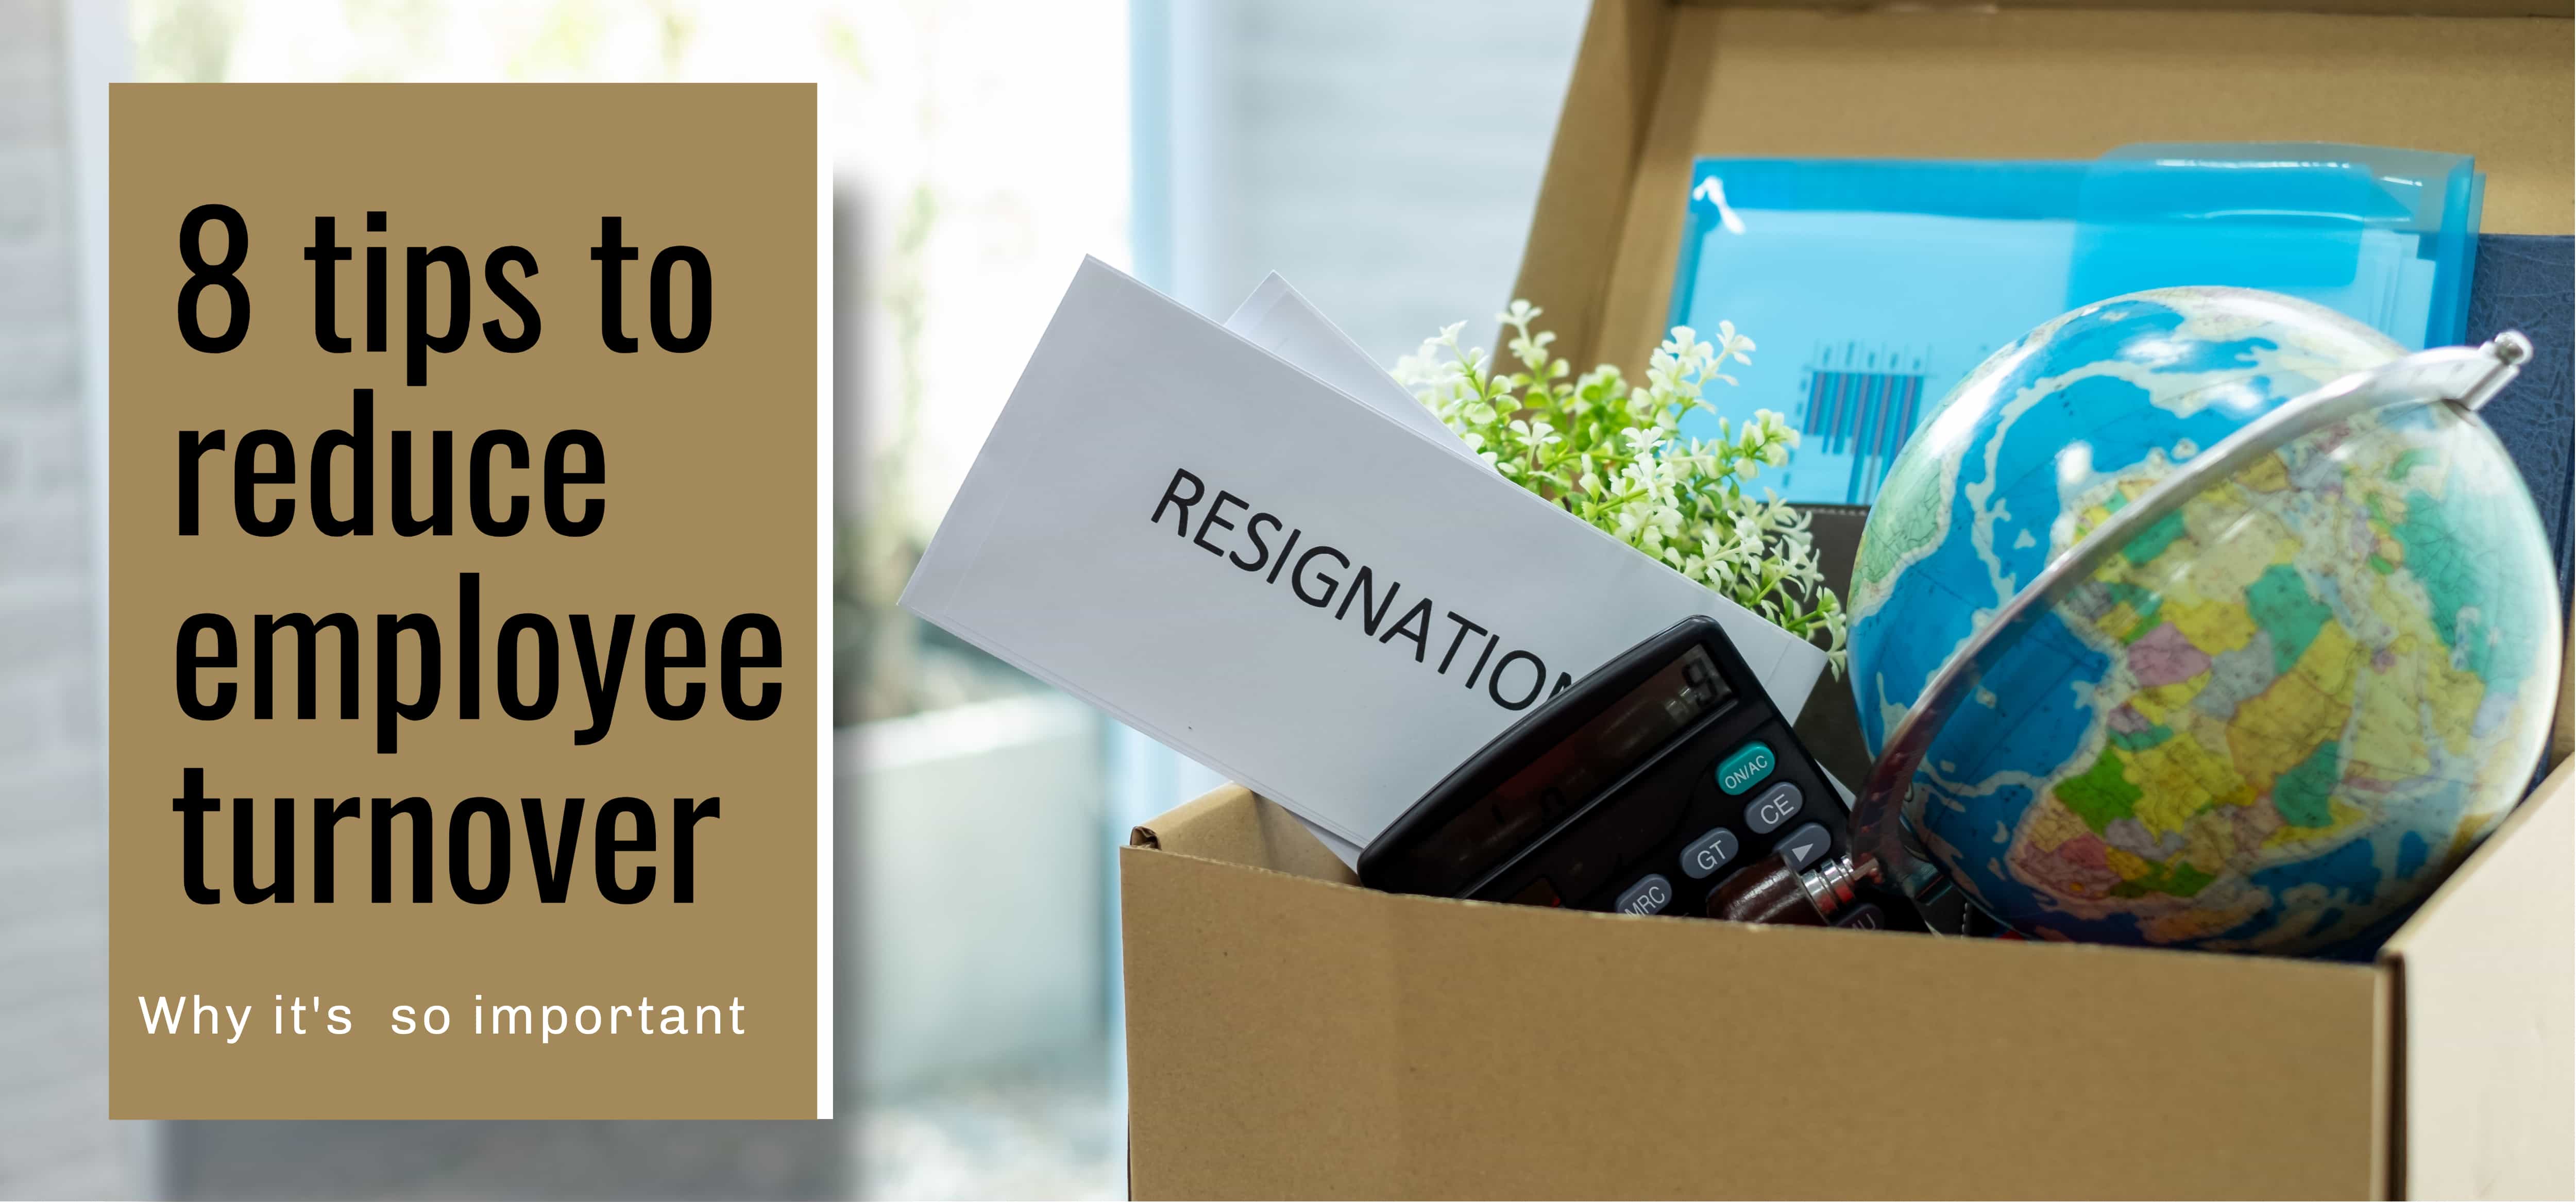 8 tips to reduce employee turnover: Why it’s so important